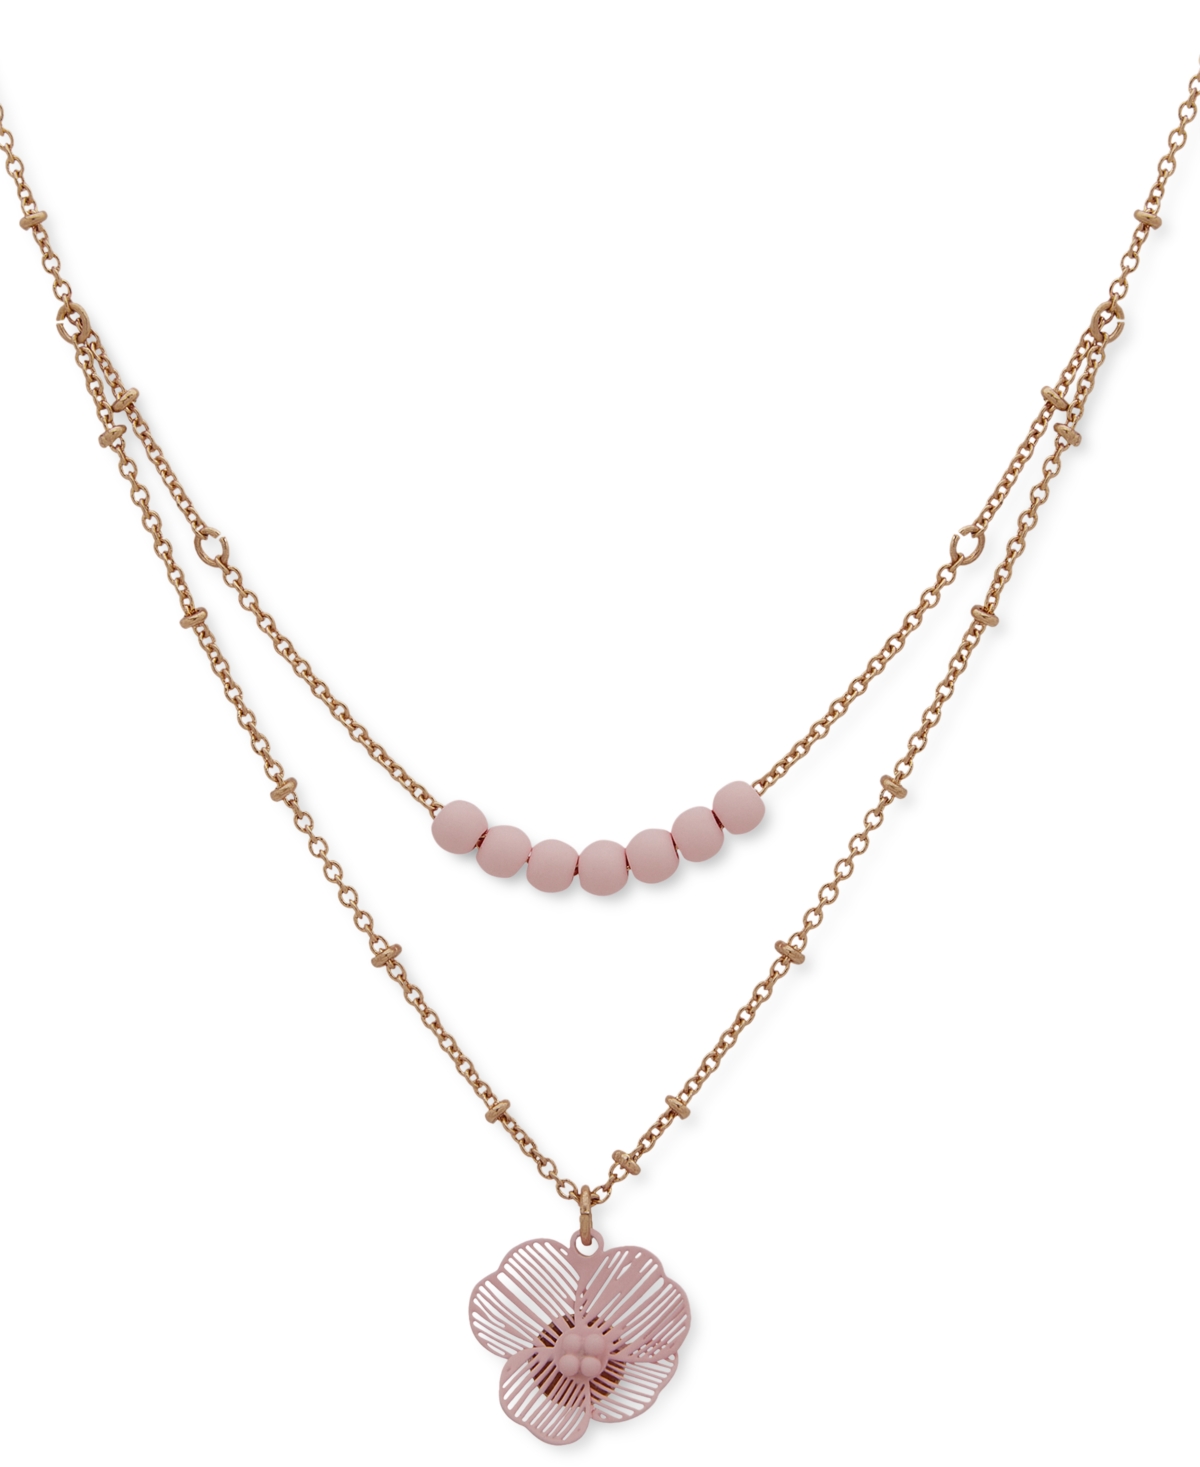 Lonna & Lilly Gold-tone Color Artistic Flower Beaded Layered Pendant Necklace, 16" + 3" Extender In Pink